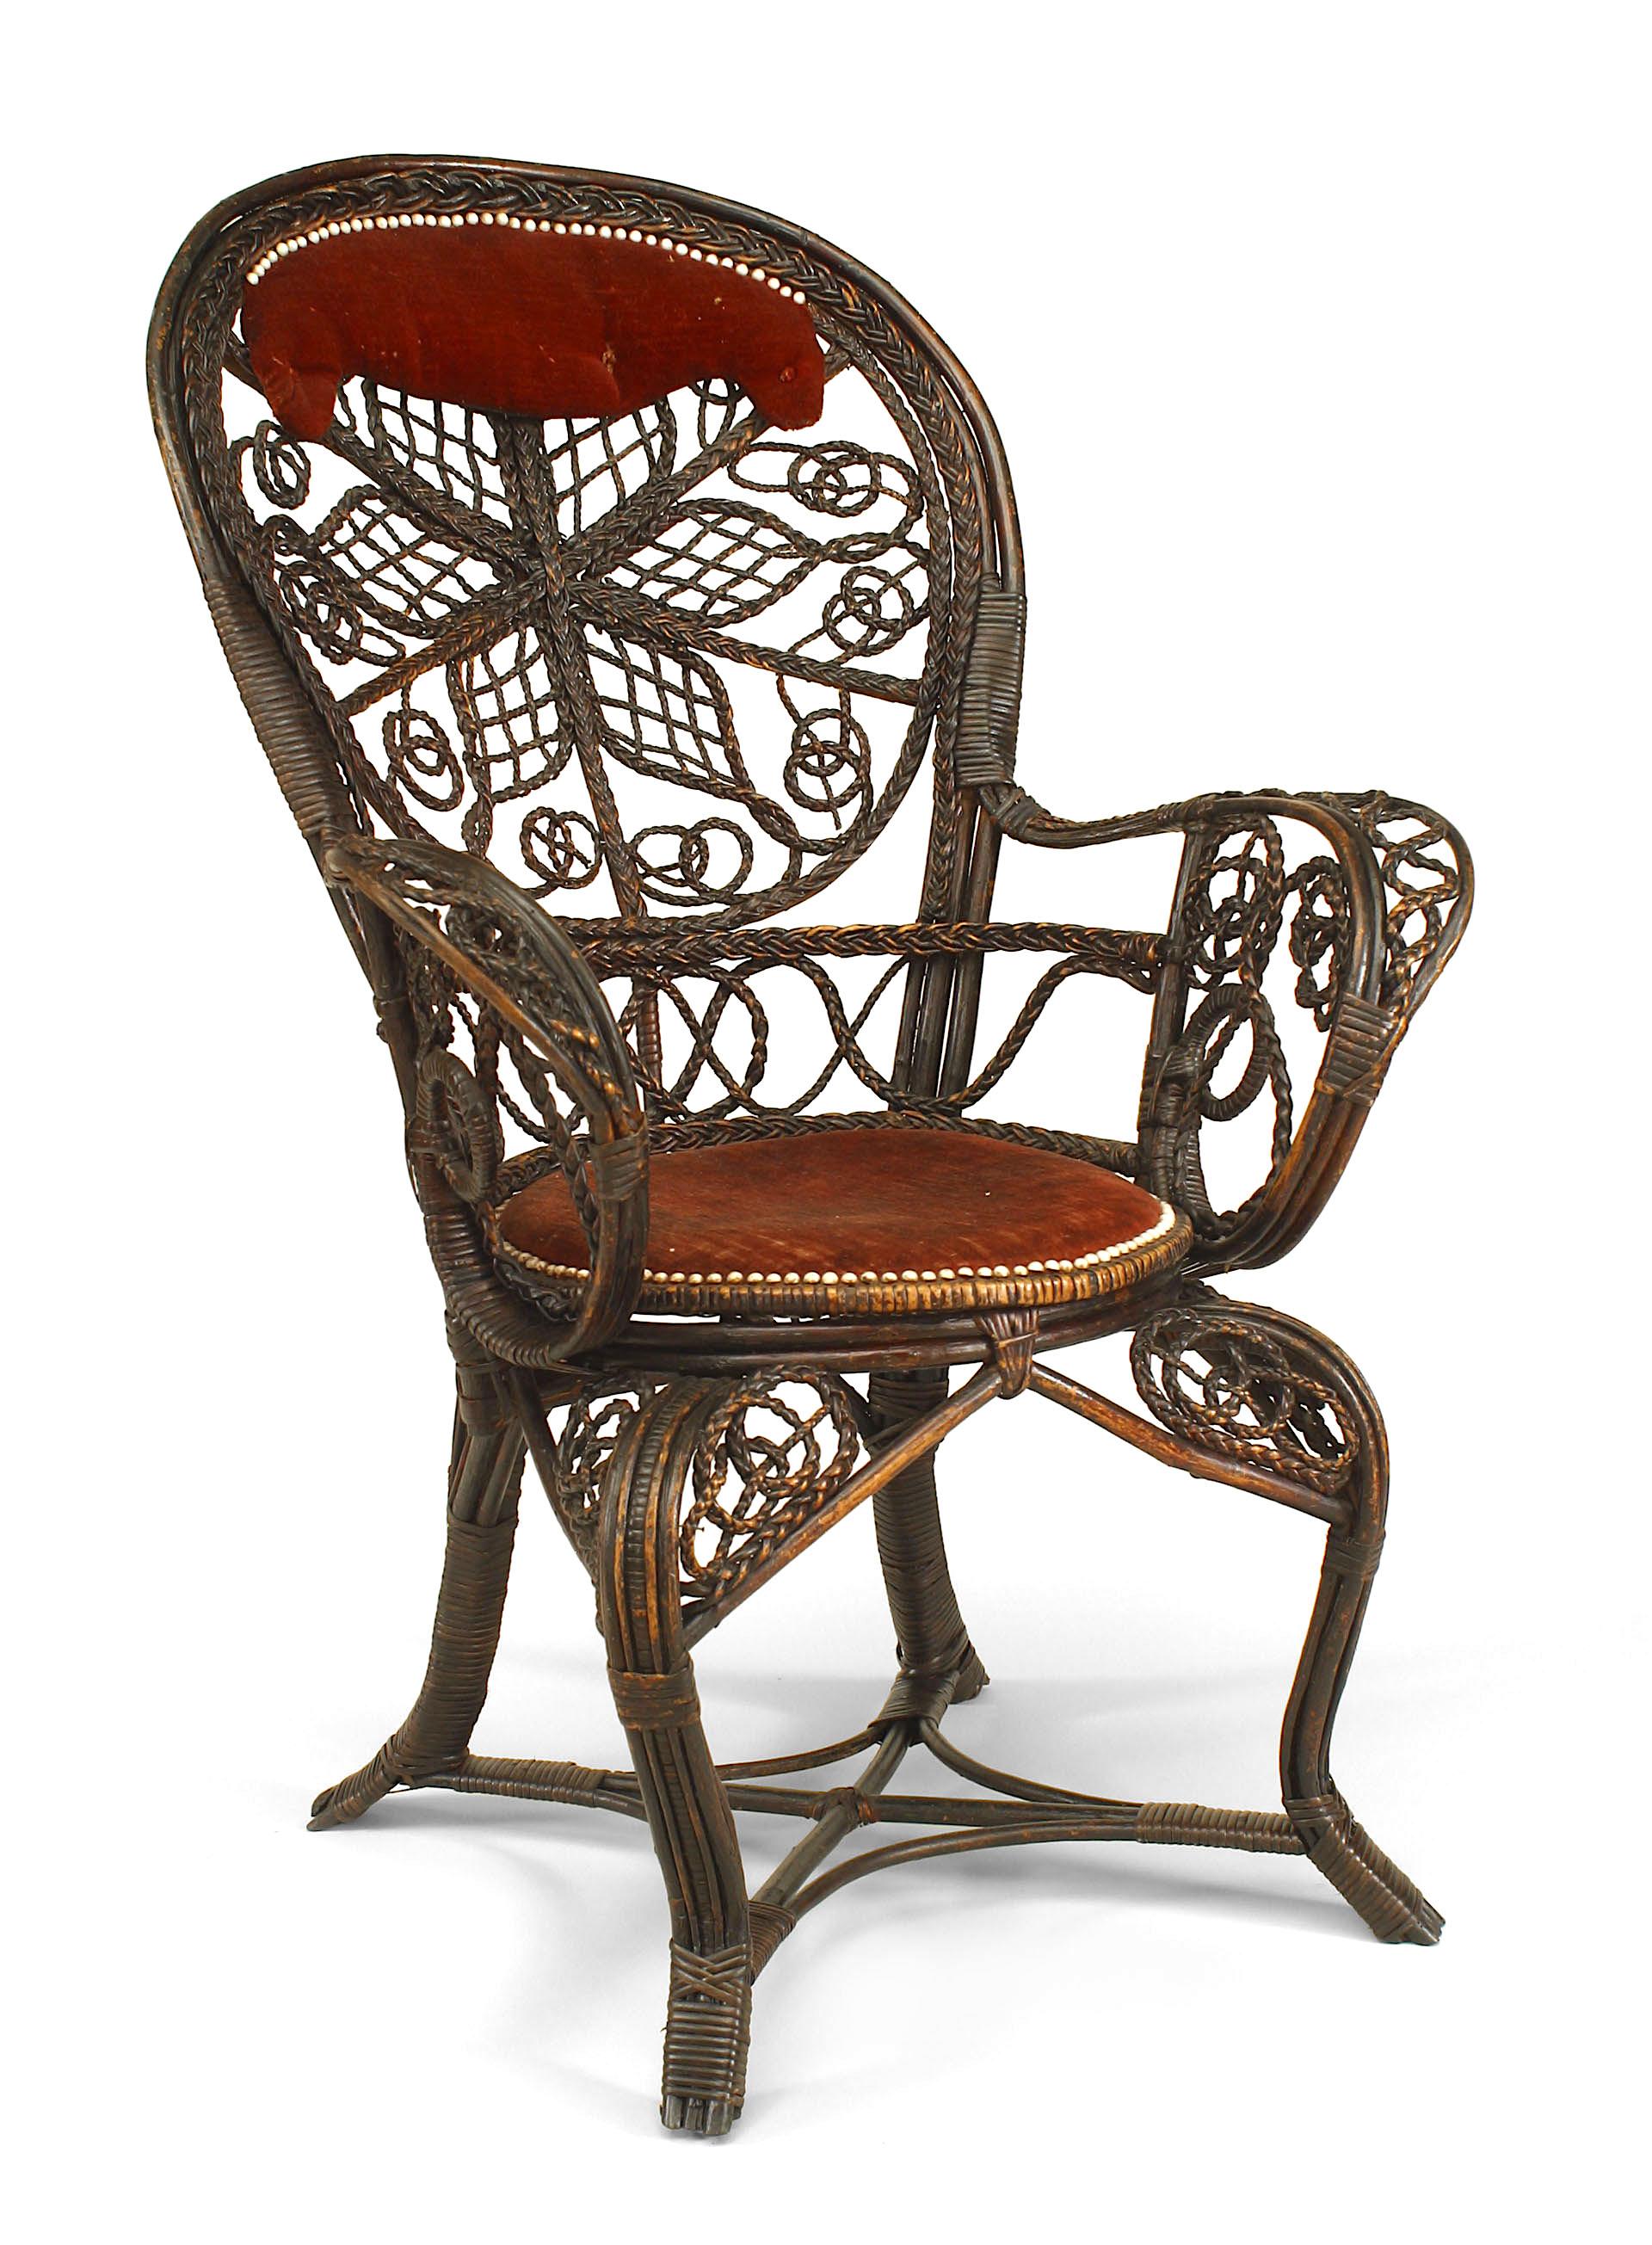 Pair of American Victorian dark stained wicker character fan back armchairs with filigree scroll design and red velvet upholstered seats and headrests. (manufactured by COLT) (PRICED EACH)
